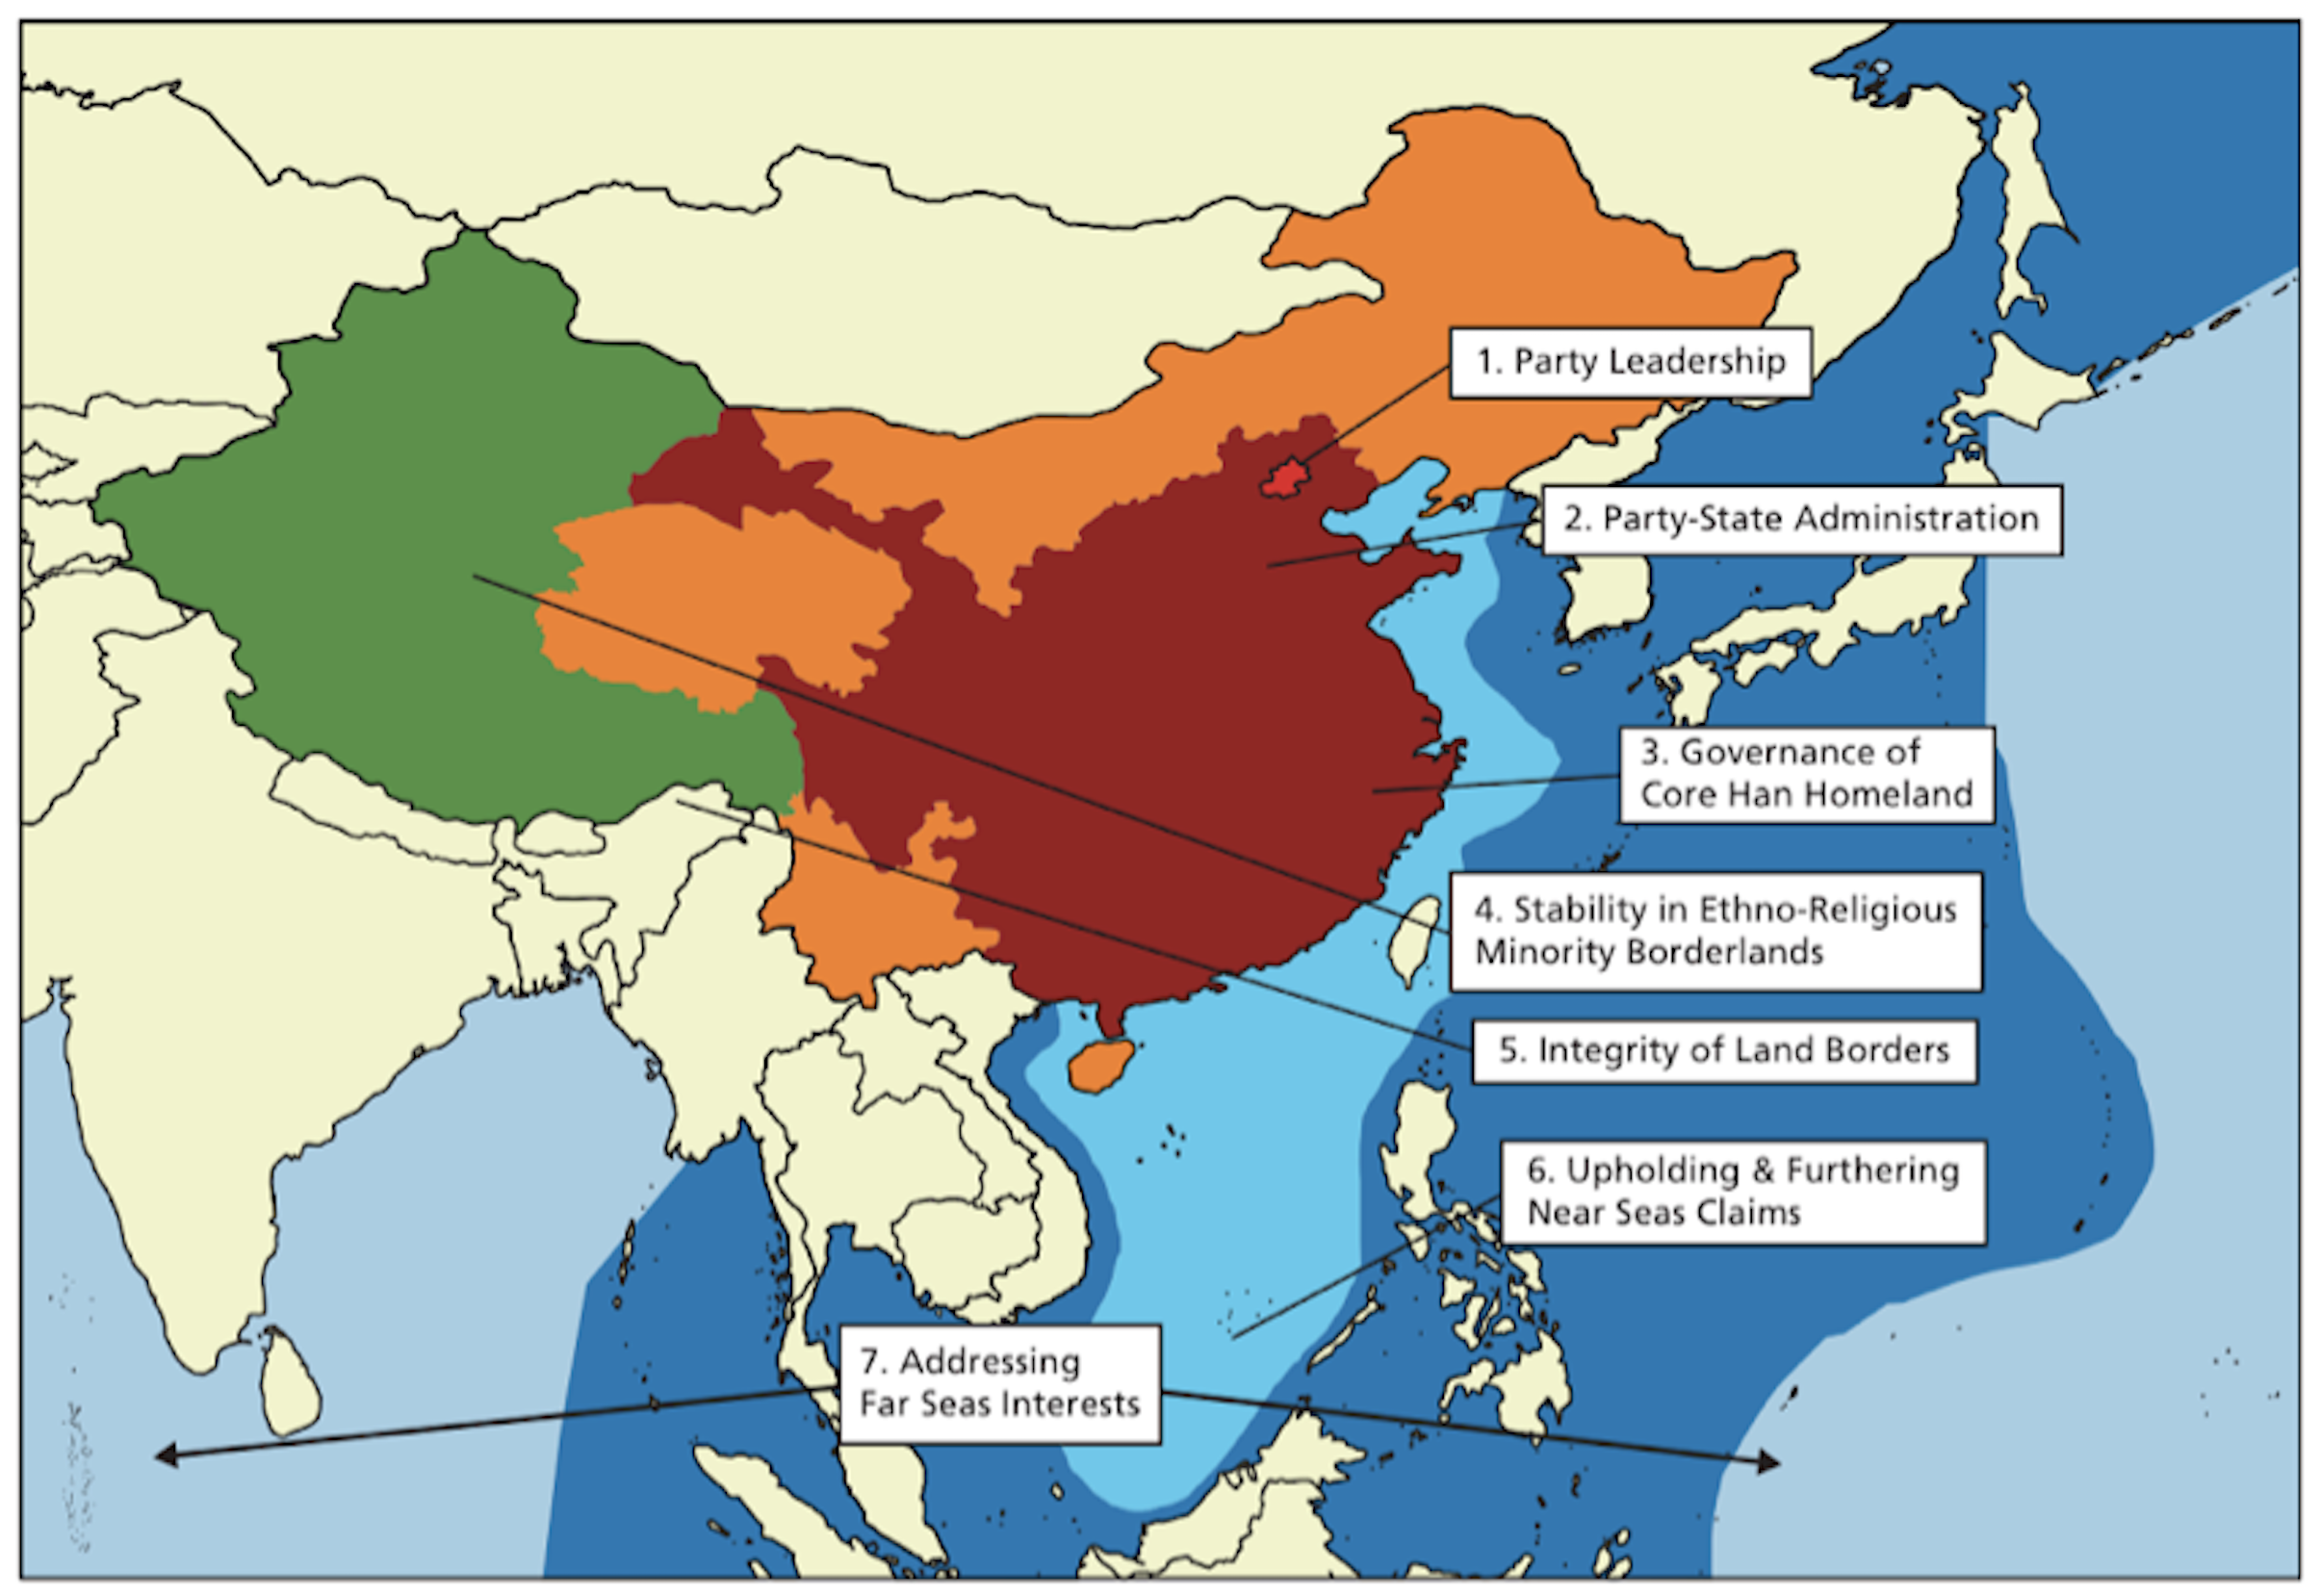 “Figure 4.1: China’s Hierarchy of National Security Priorities,” in “China,” in Thierry Balzacq, Peter Dombrowski, and Simon Reich, eds., Comparative Grand Strategy: A Framework and Cases (Oxford, UK: Oxford University Press, 2019), 79.